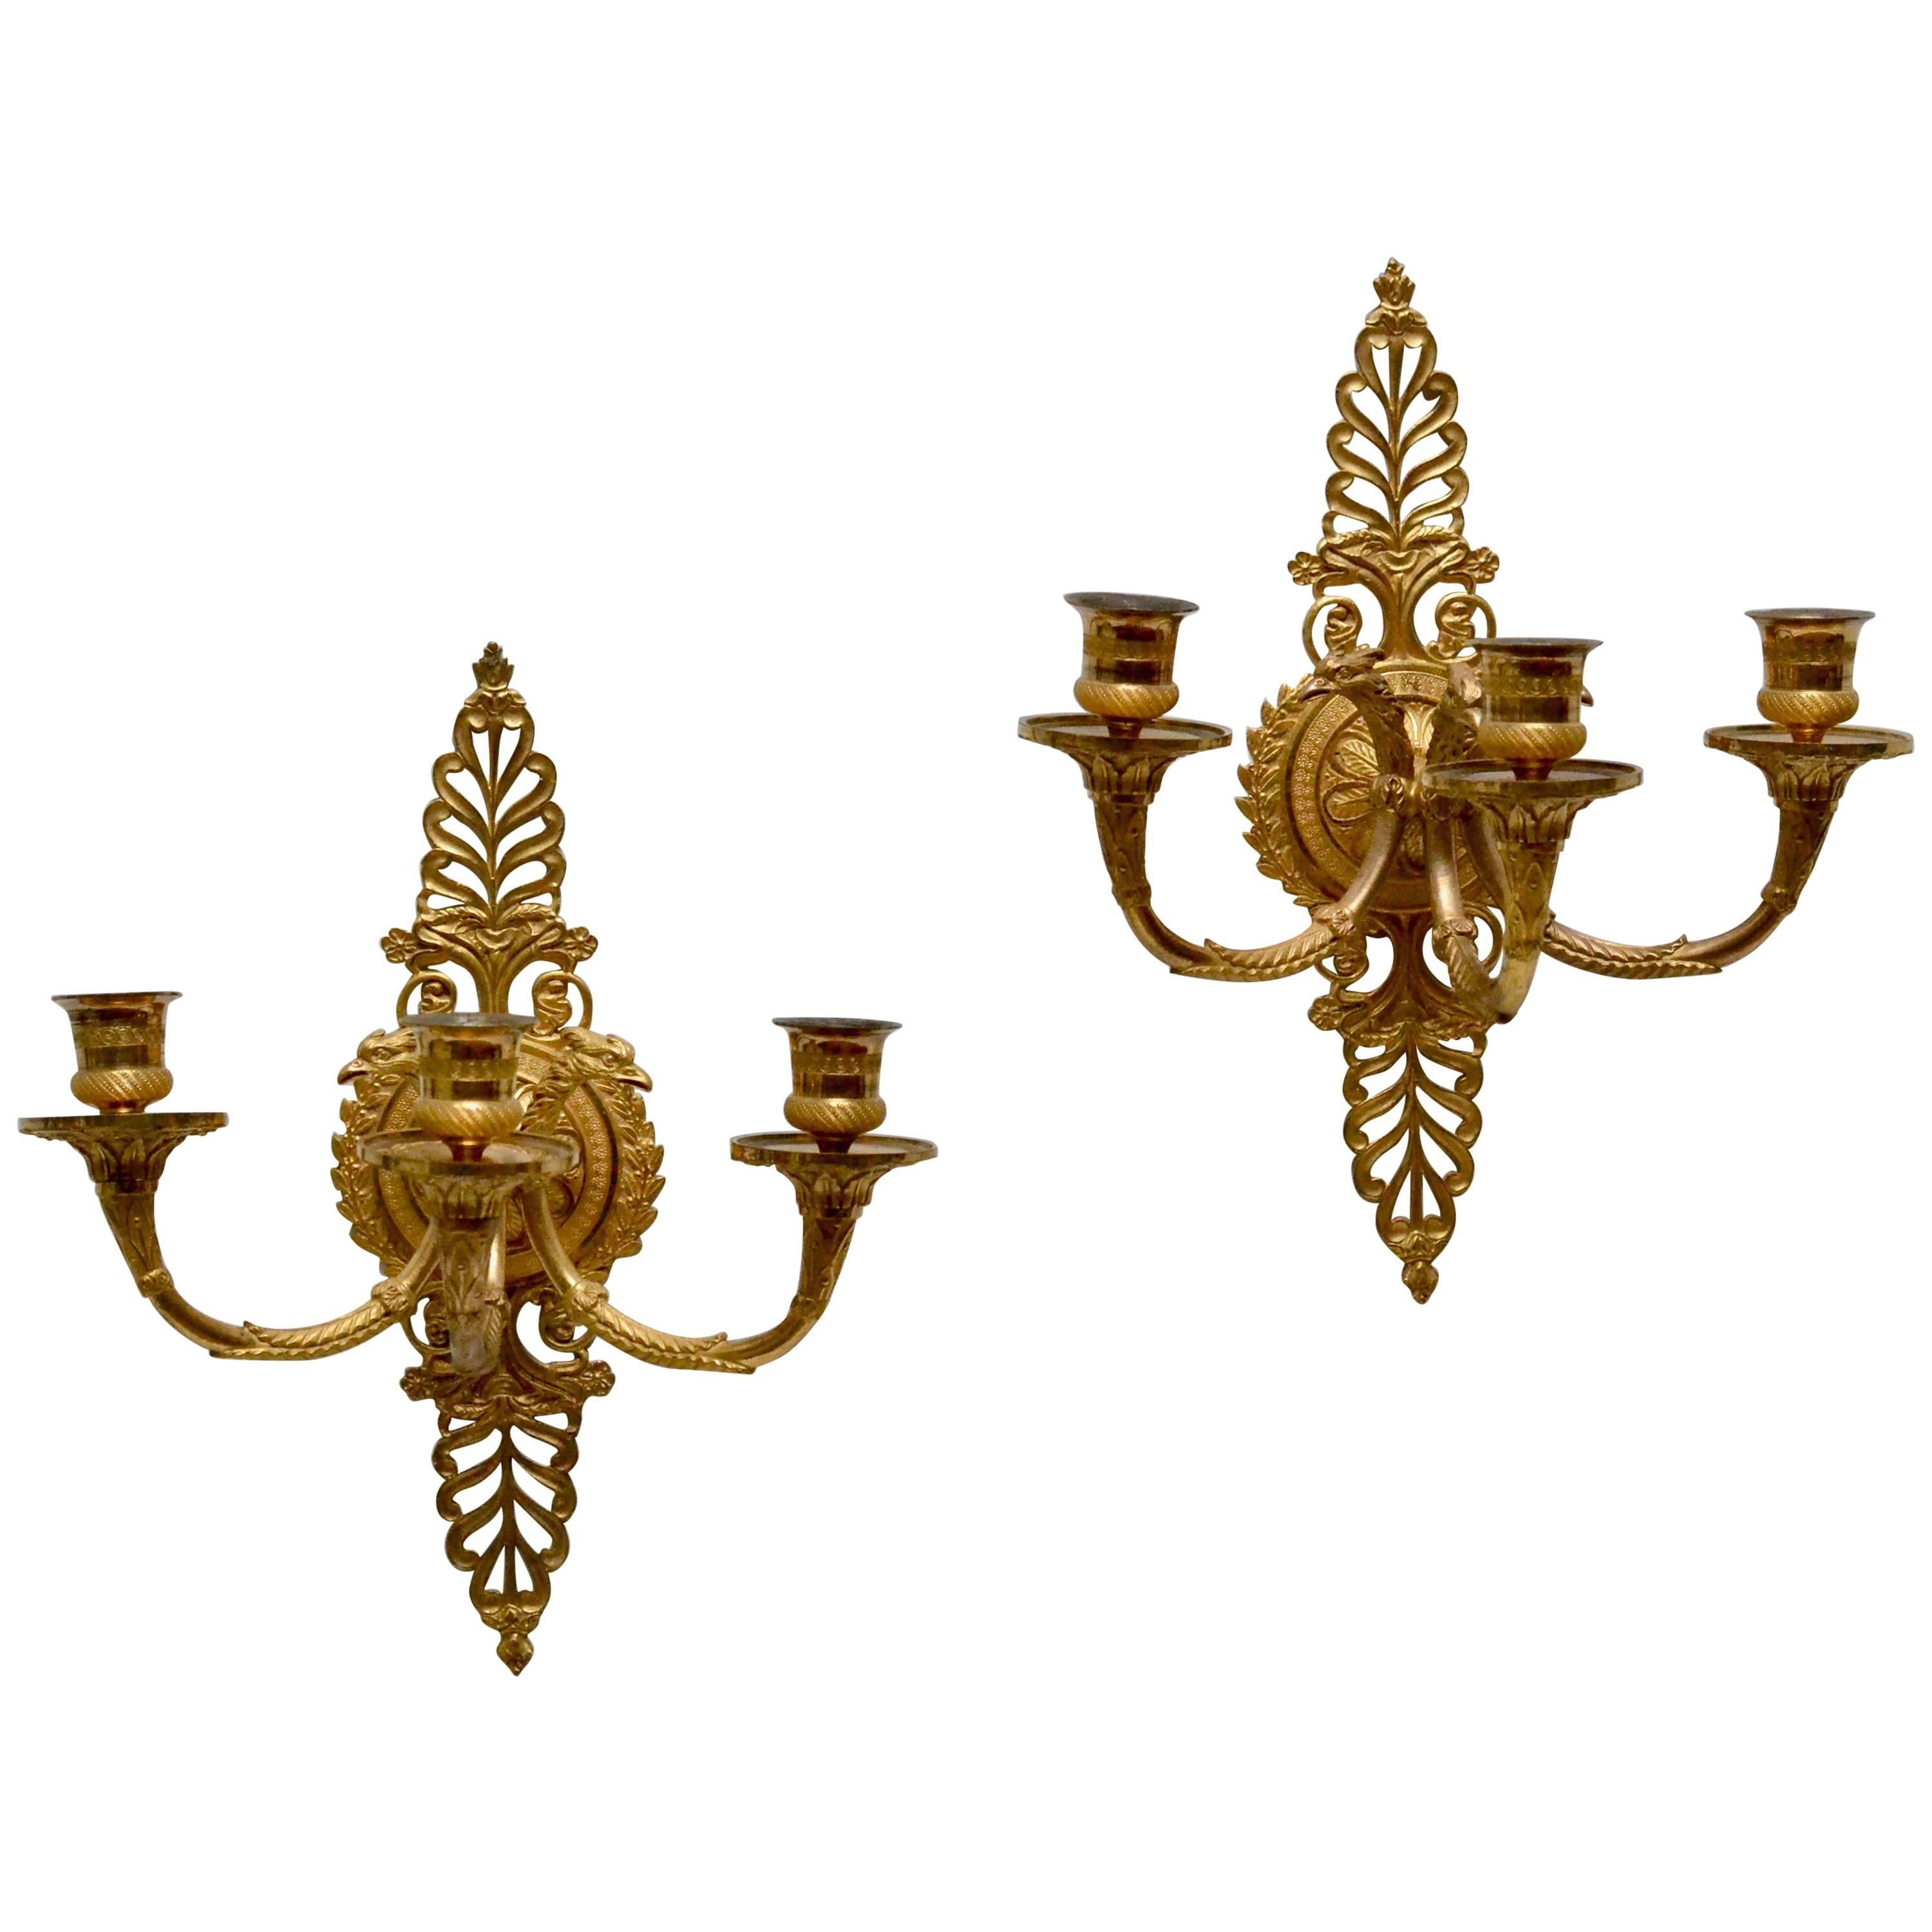 Pair of Empire Gilt Bronze Wall Appliques, Early 19th cent.